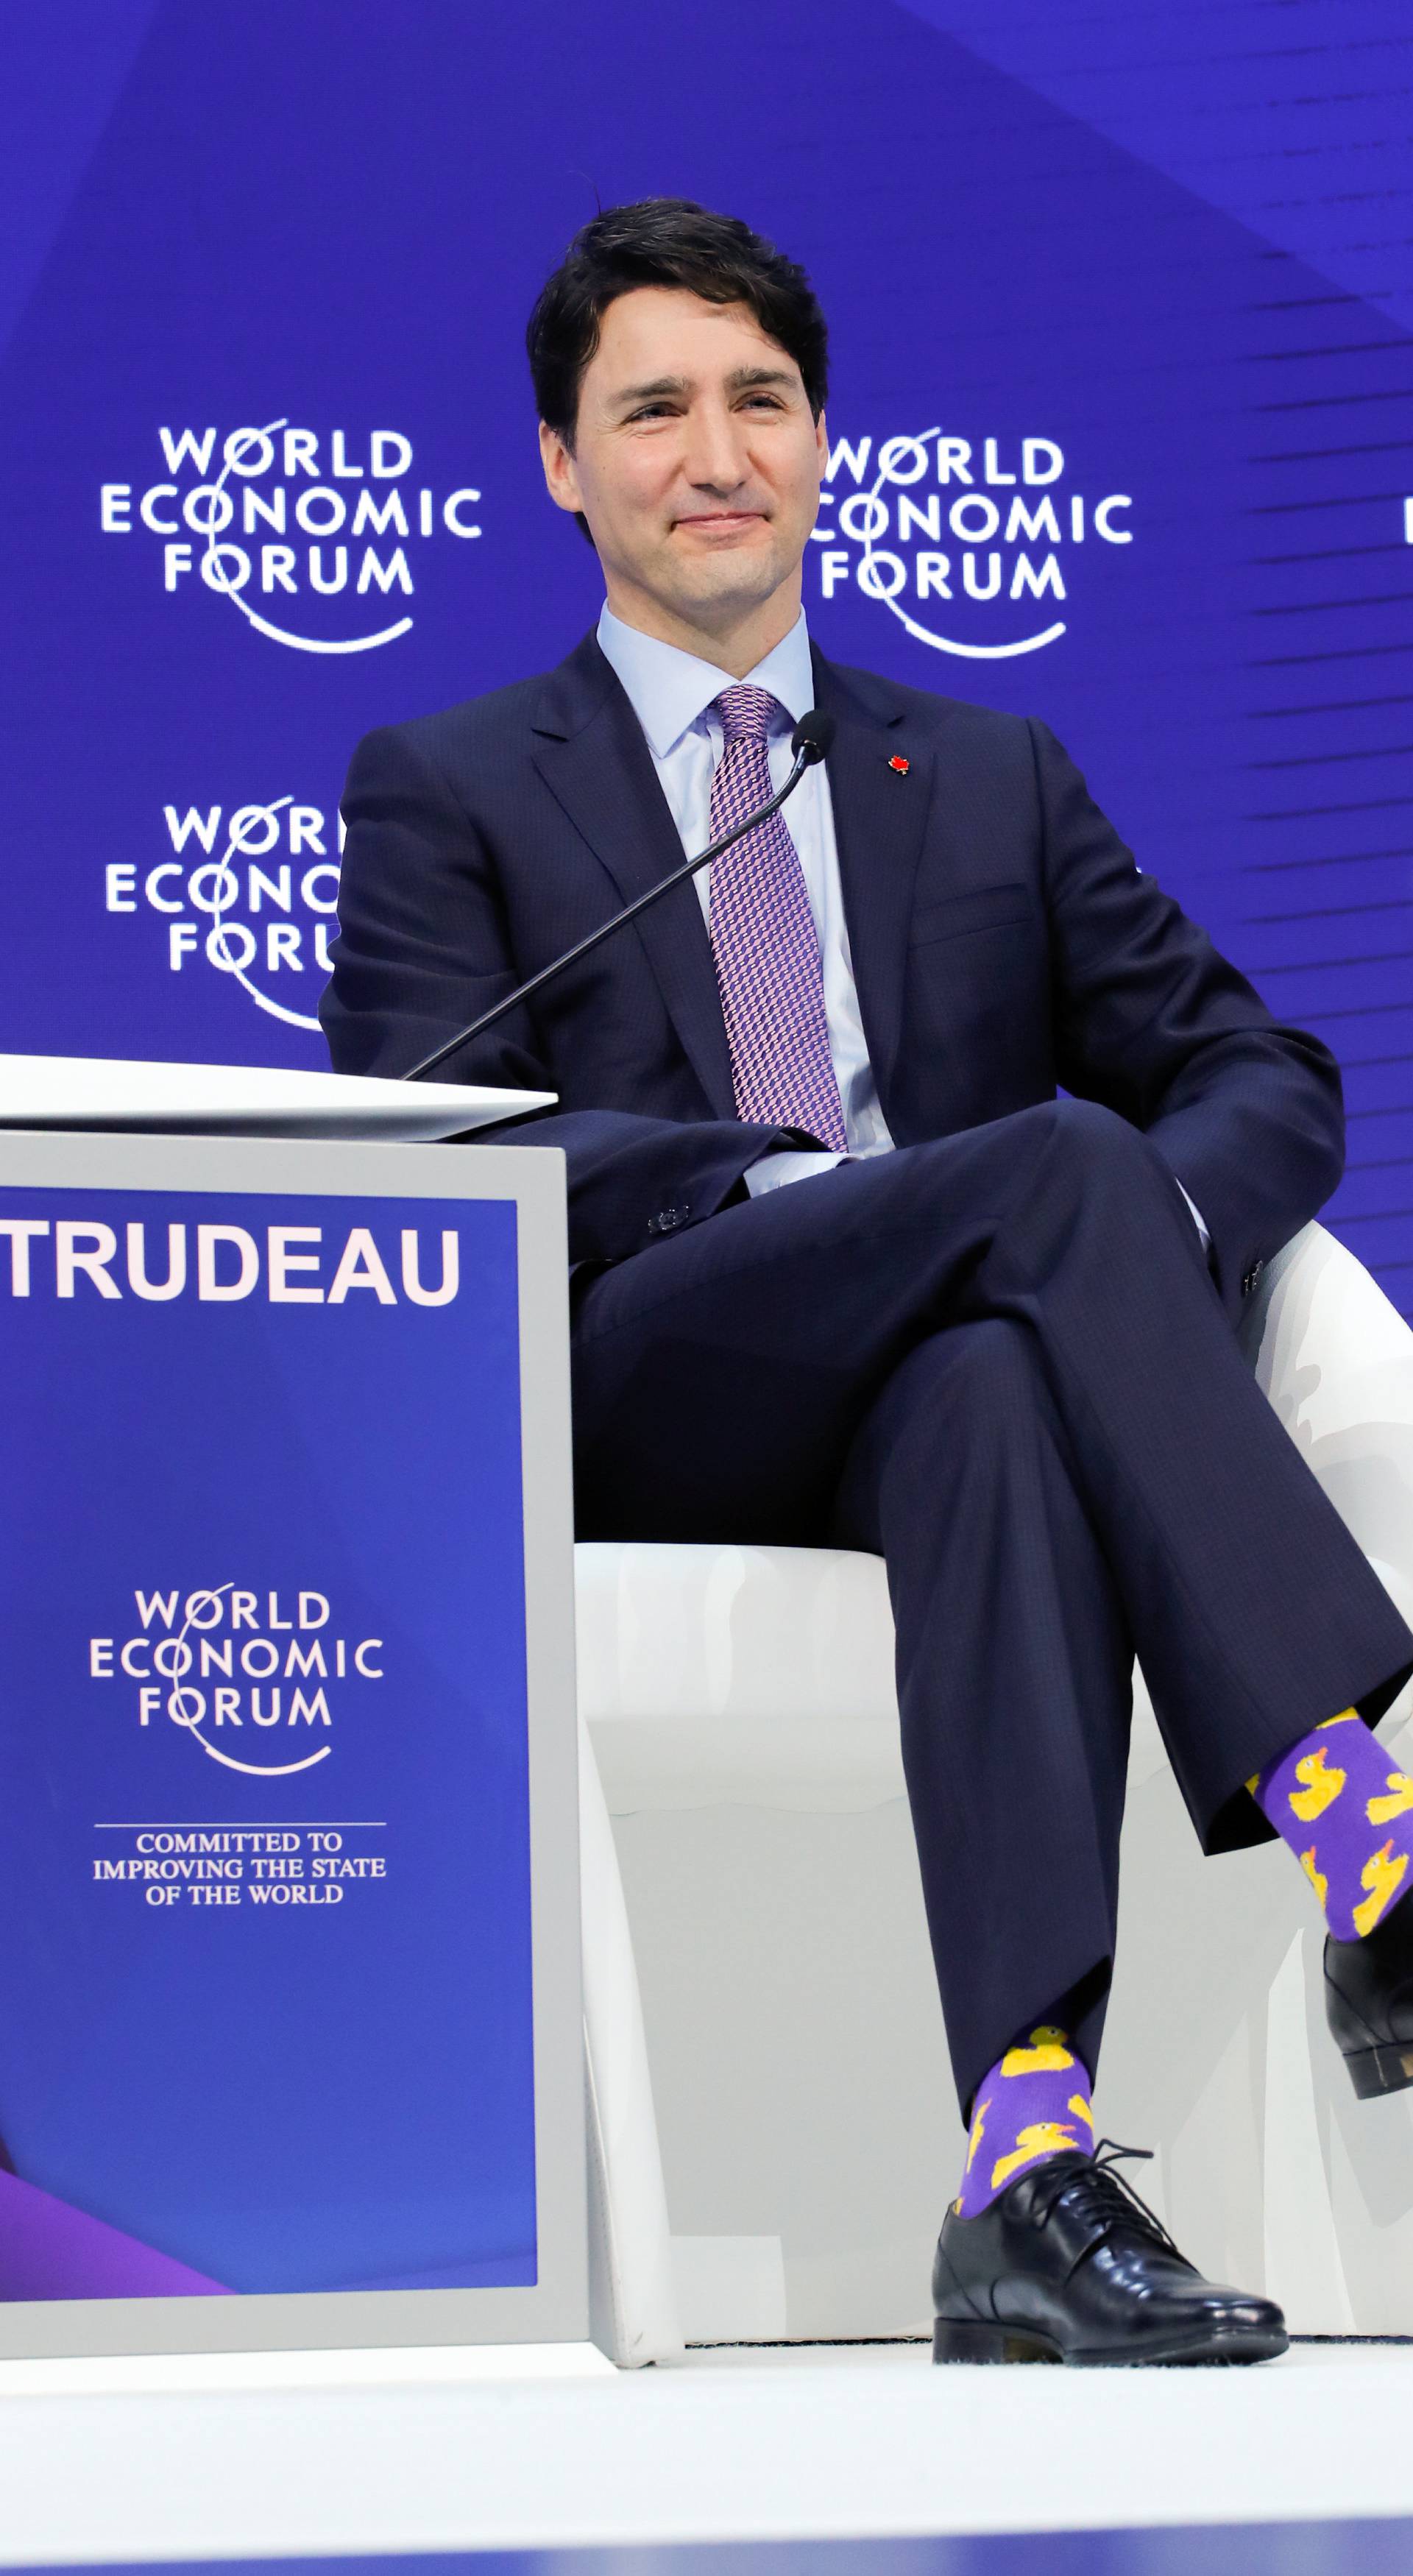 Canada's Prime Minister Justin Trudeau attends the World Economic Forum (WEF) annual meeting in Davos